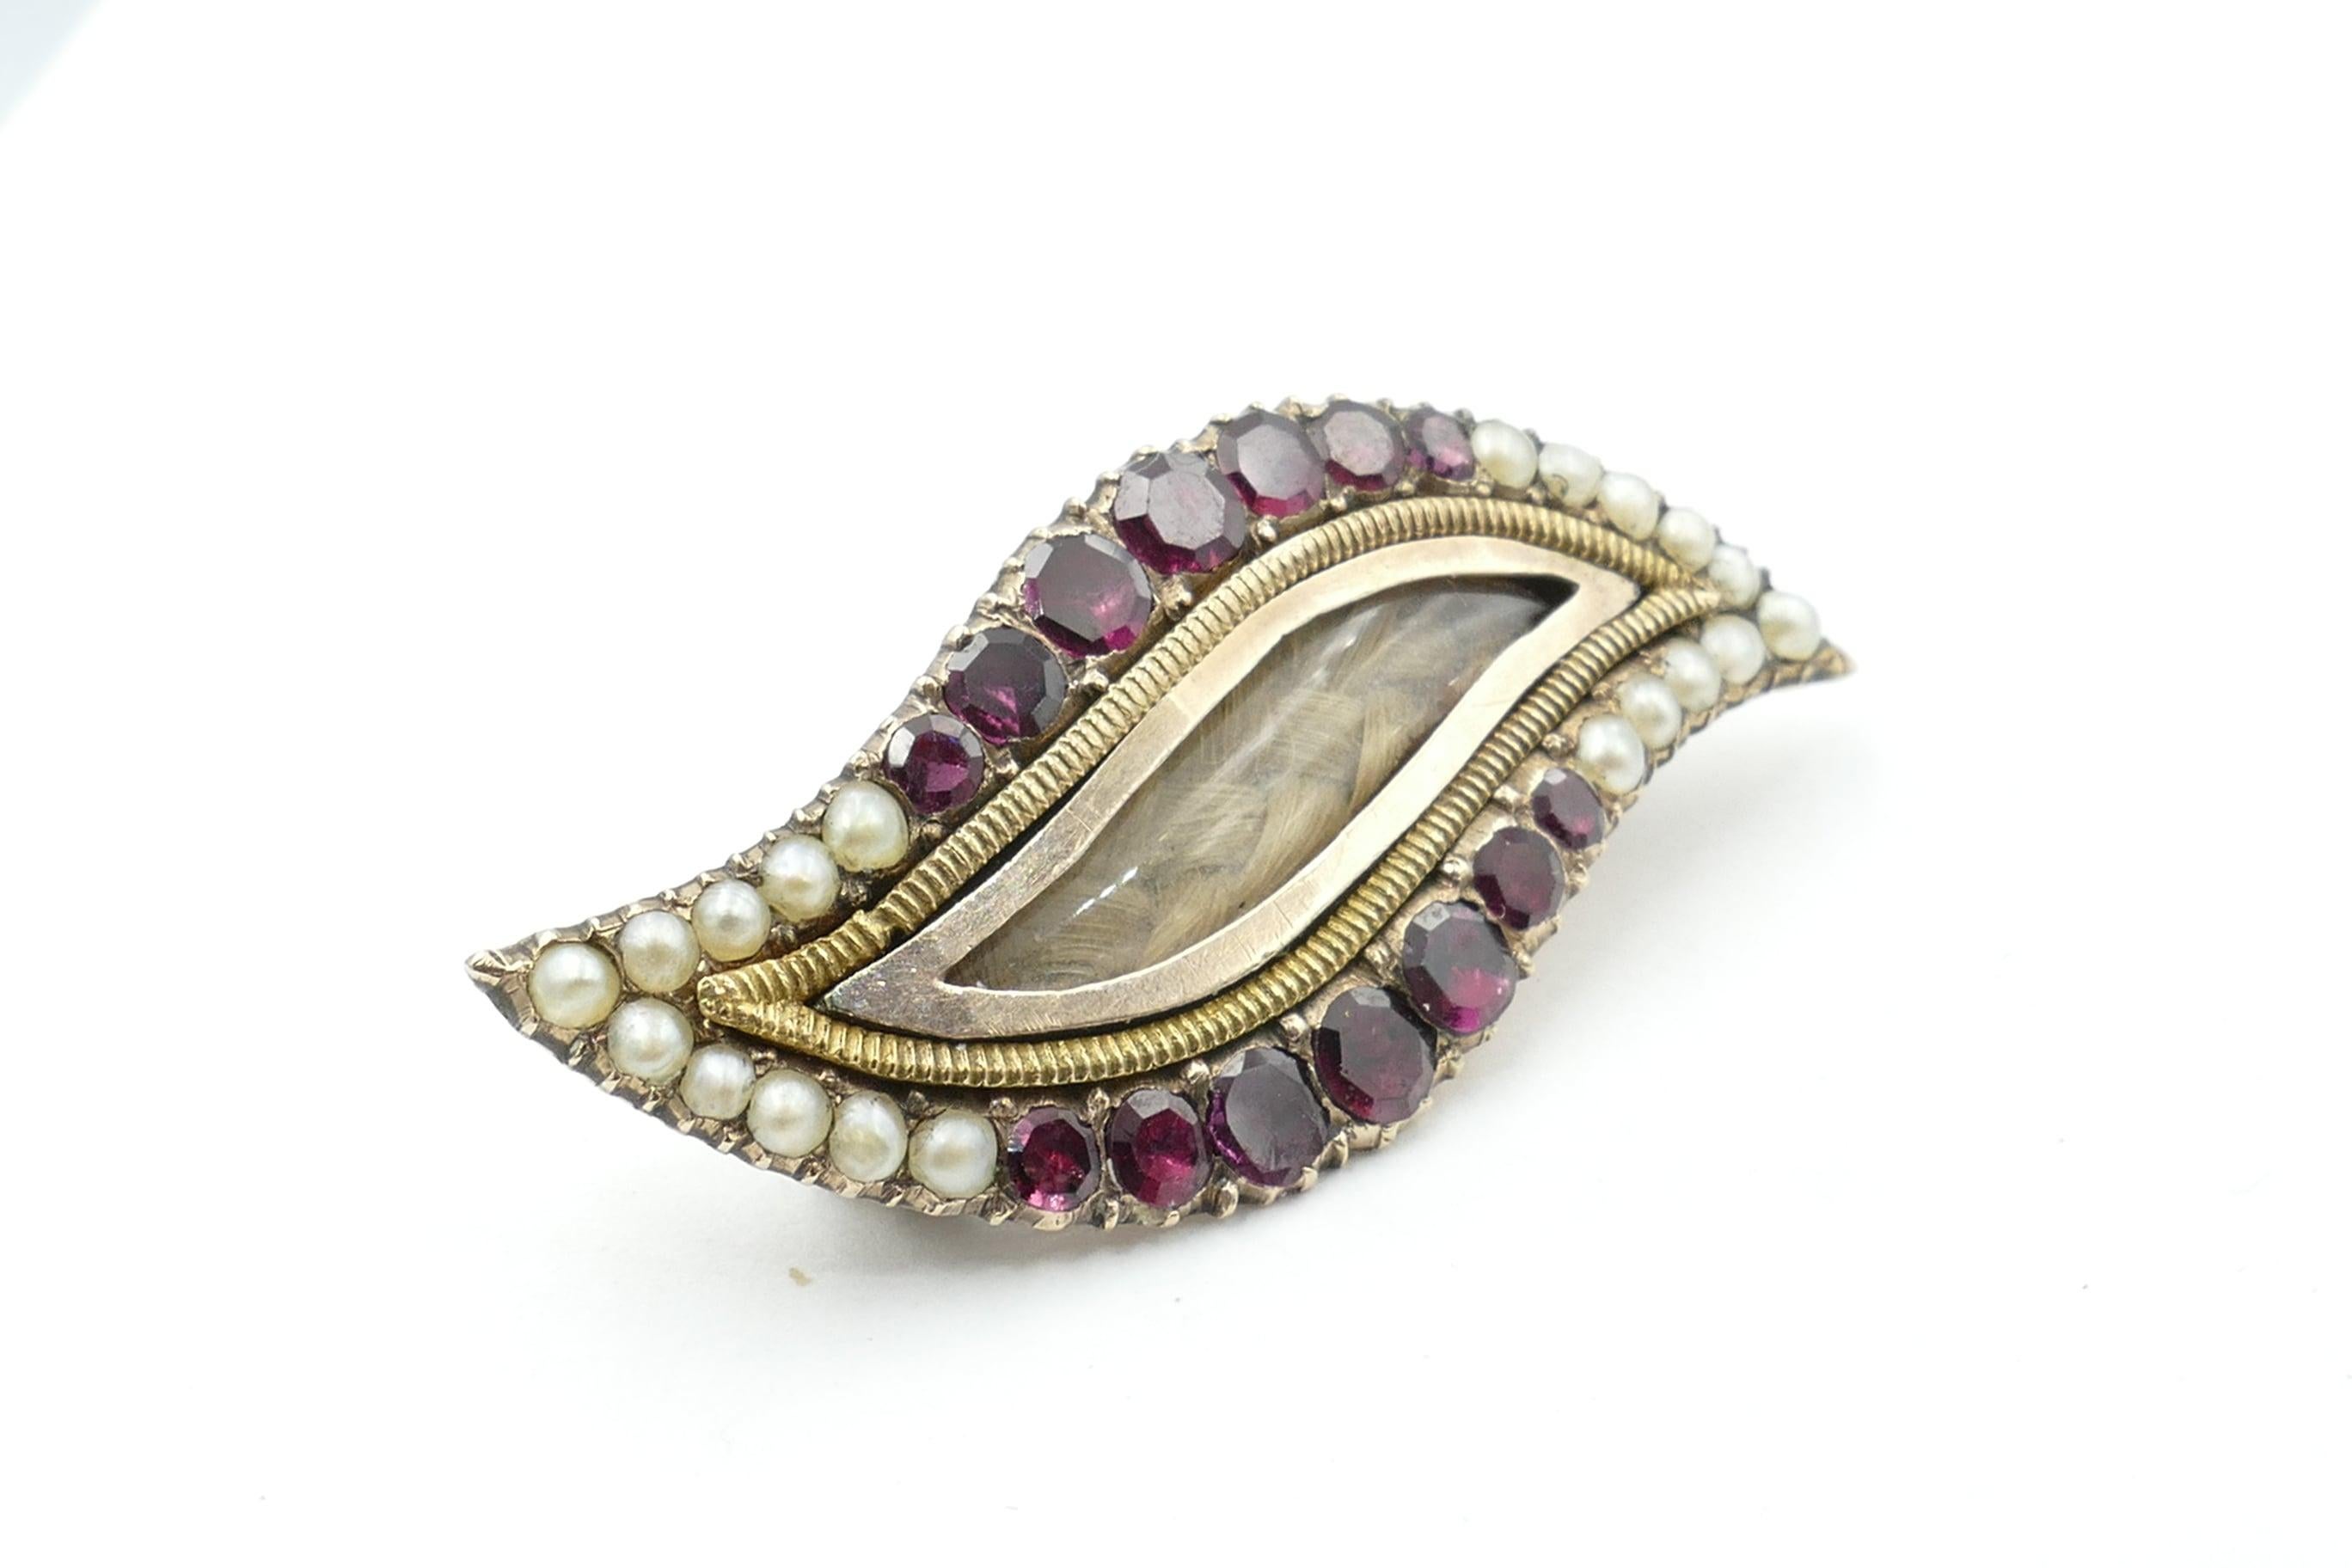 This lovely Antique Mourning Brooch/Pendant features 14 Garnets, graduated from 2.06mm - 3.08mm Diameter range, of a strong Purplish/red Colour, Tone medium-dark, Clarity eye-clean, Round cut, Micro-claw set.
As well there are 20 old Seed Pearls,